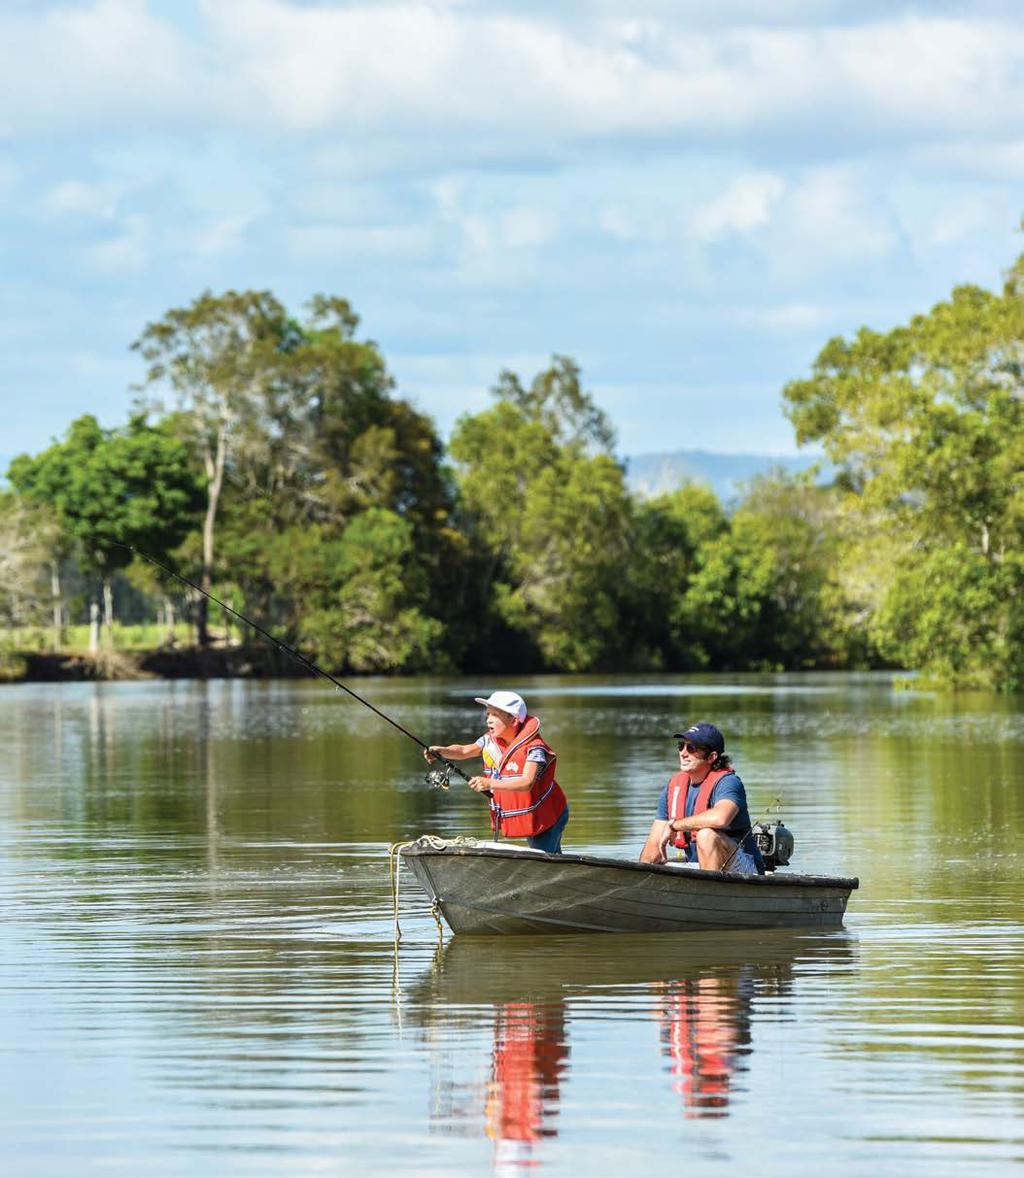 A spectacular lifestyle in harmony with the environment of Moreton Bay With its nine kilometres of meandering, picturesque river frontage, North Harbour will grow to become a vibrant waterfront